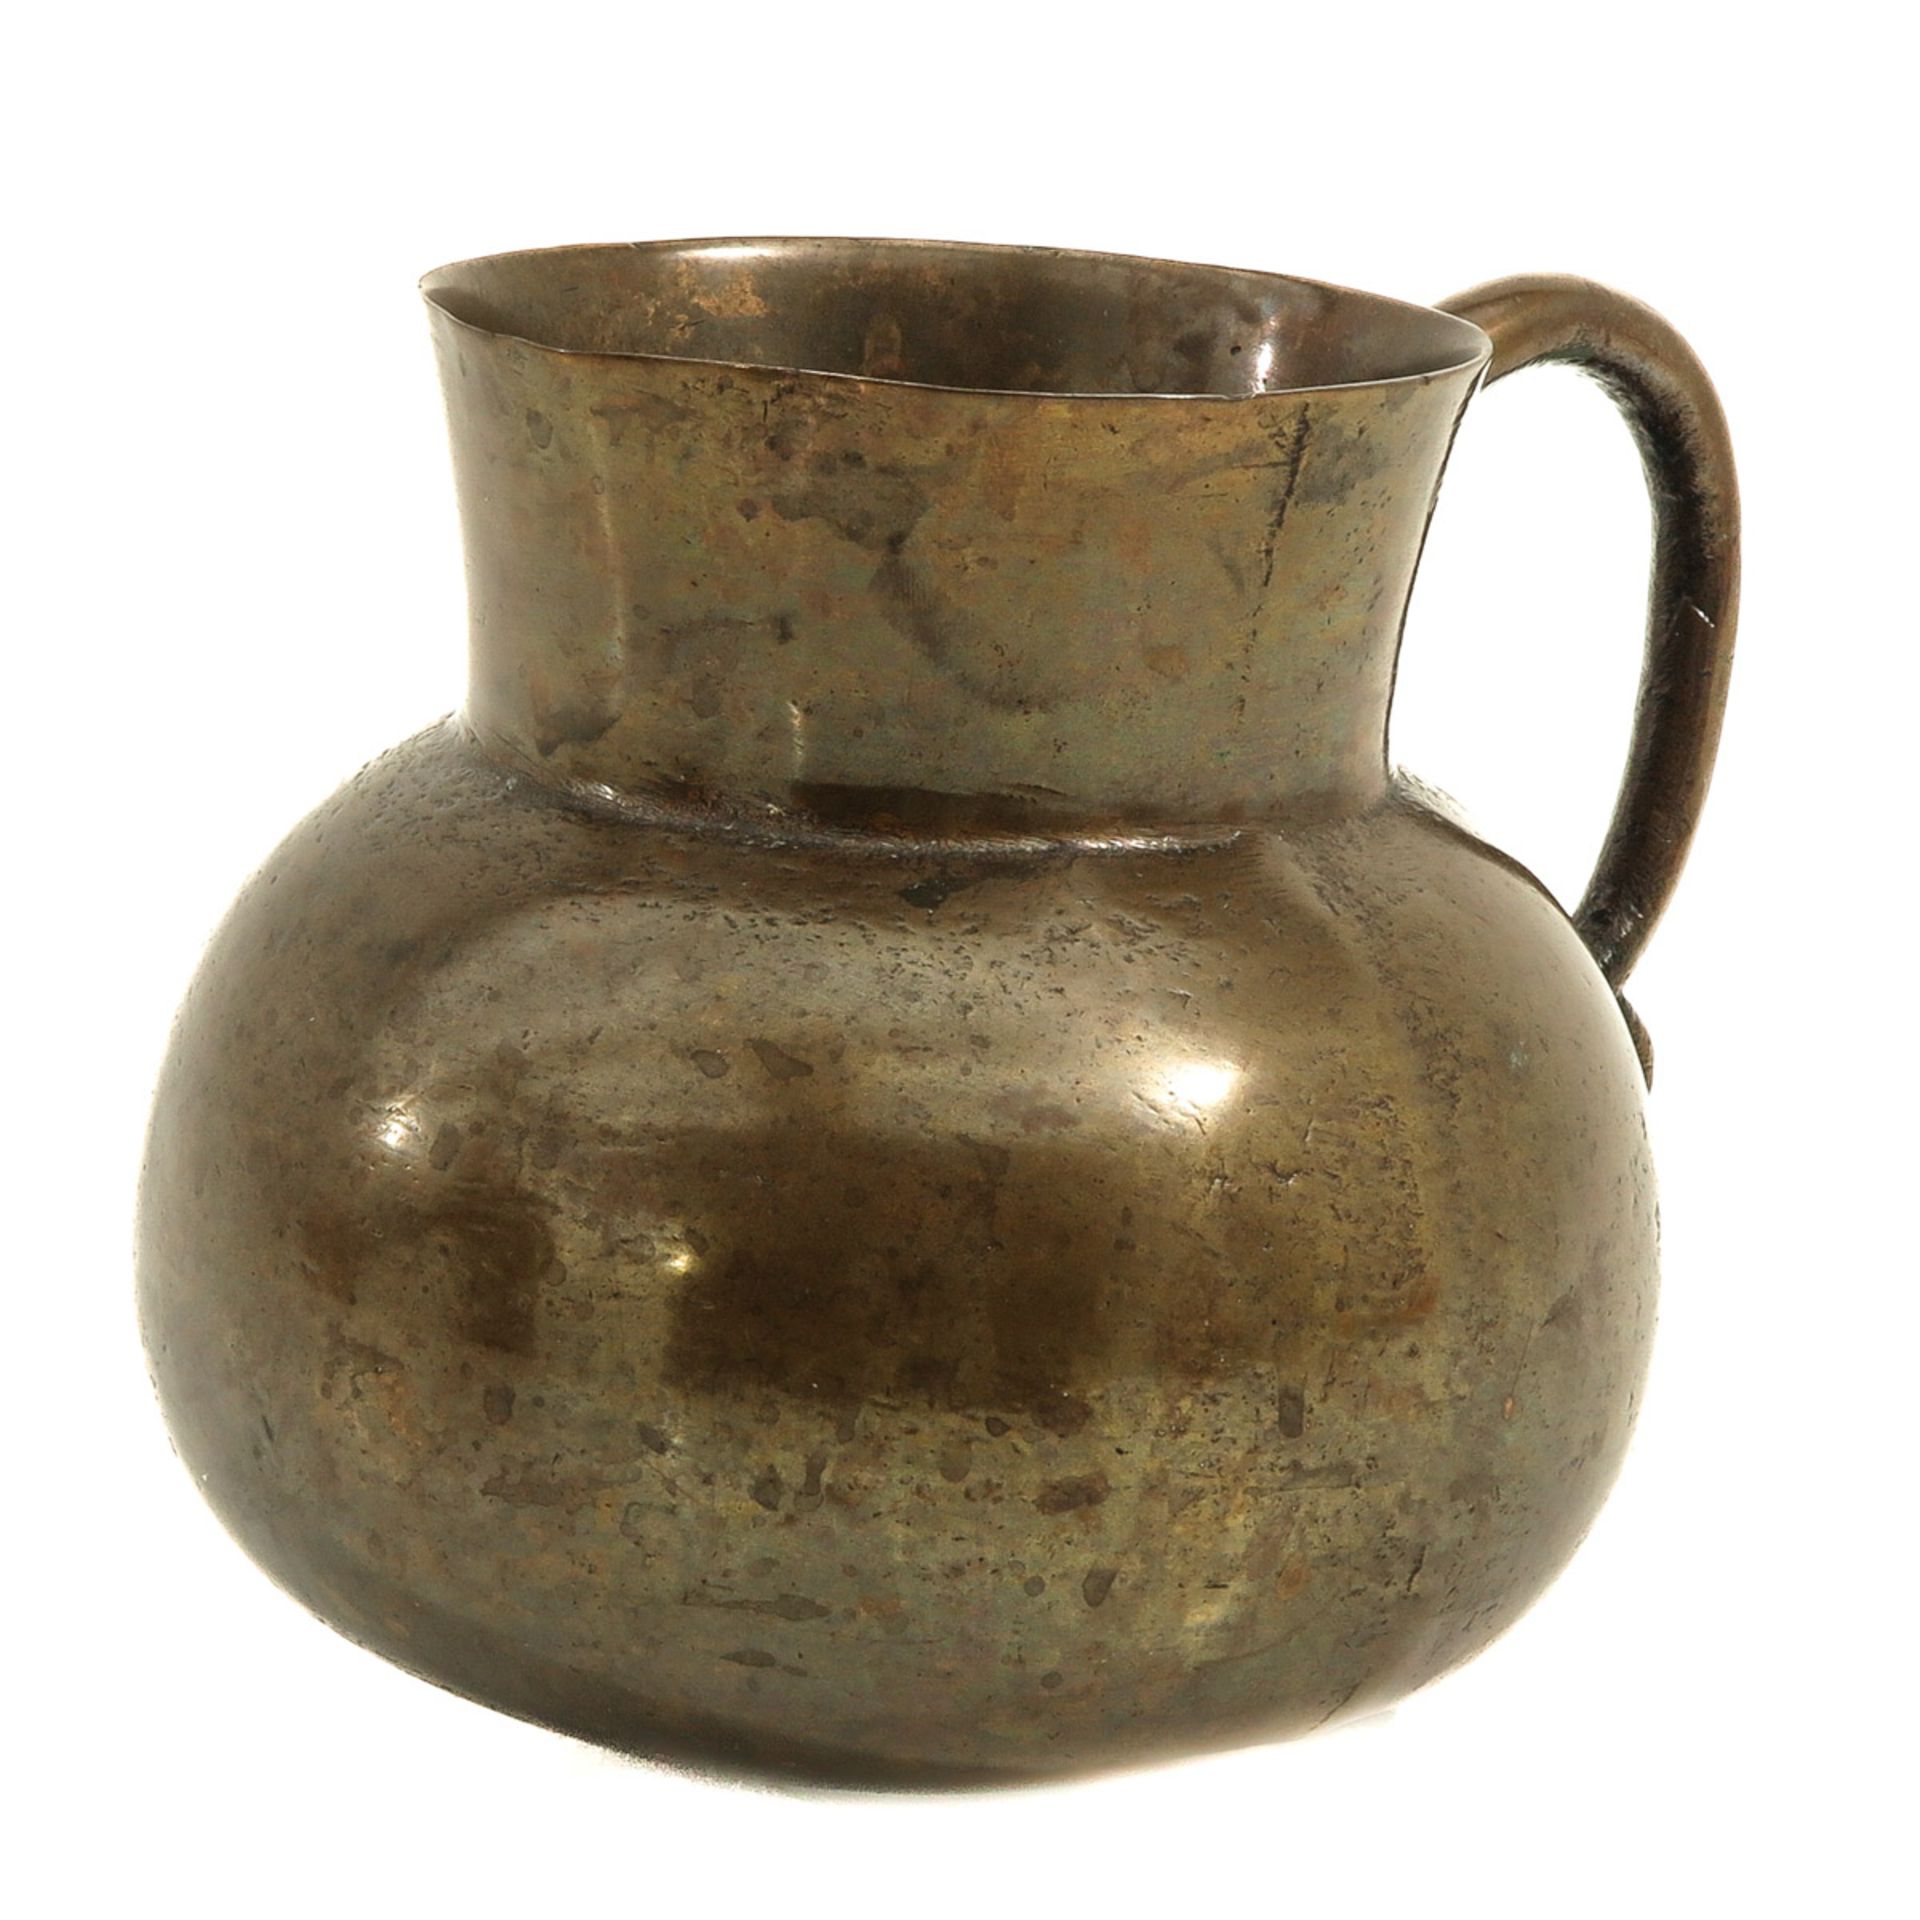 A 17th Century Measuring Cup